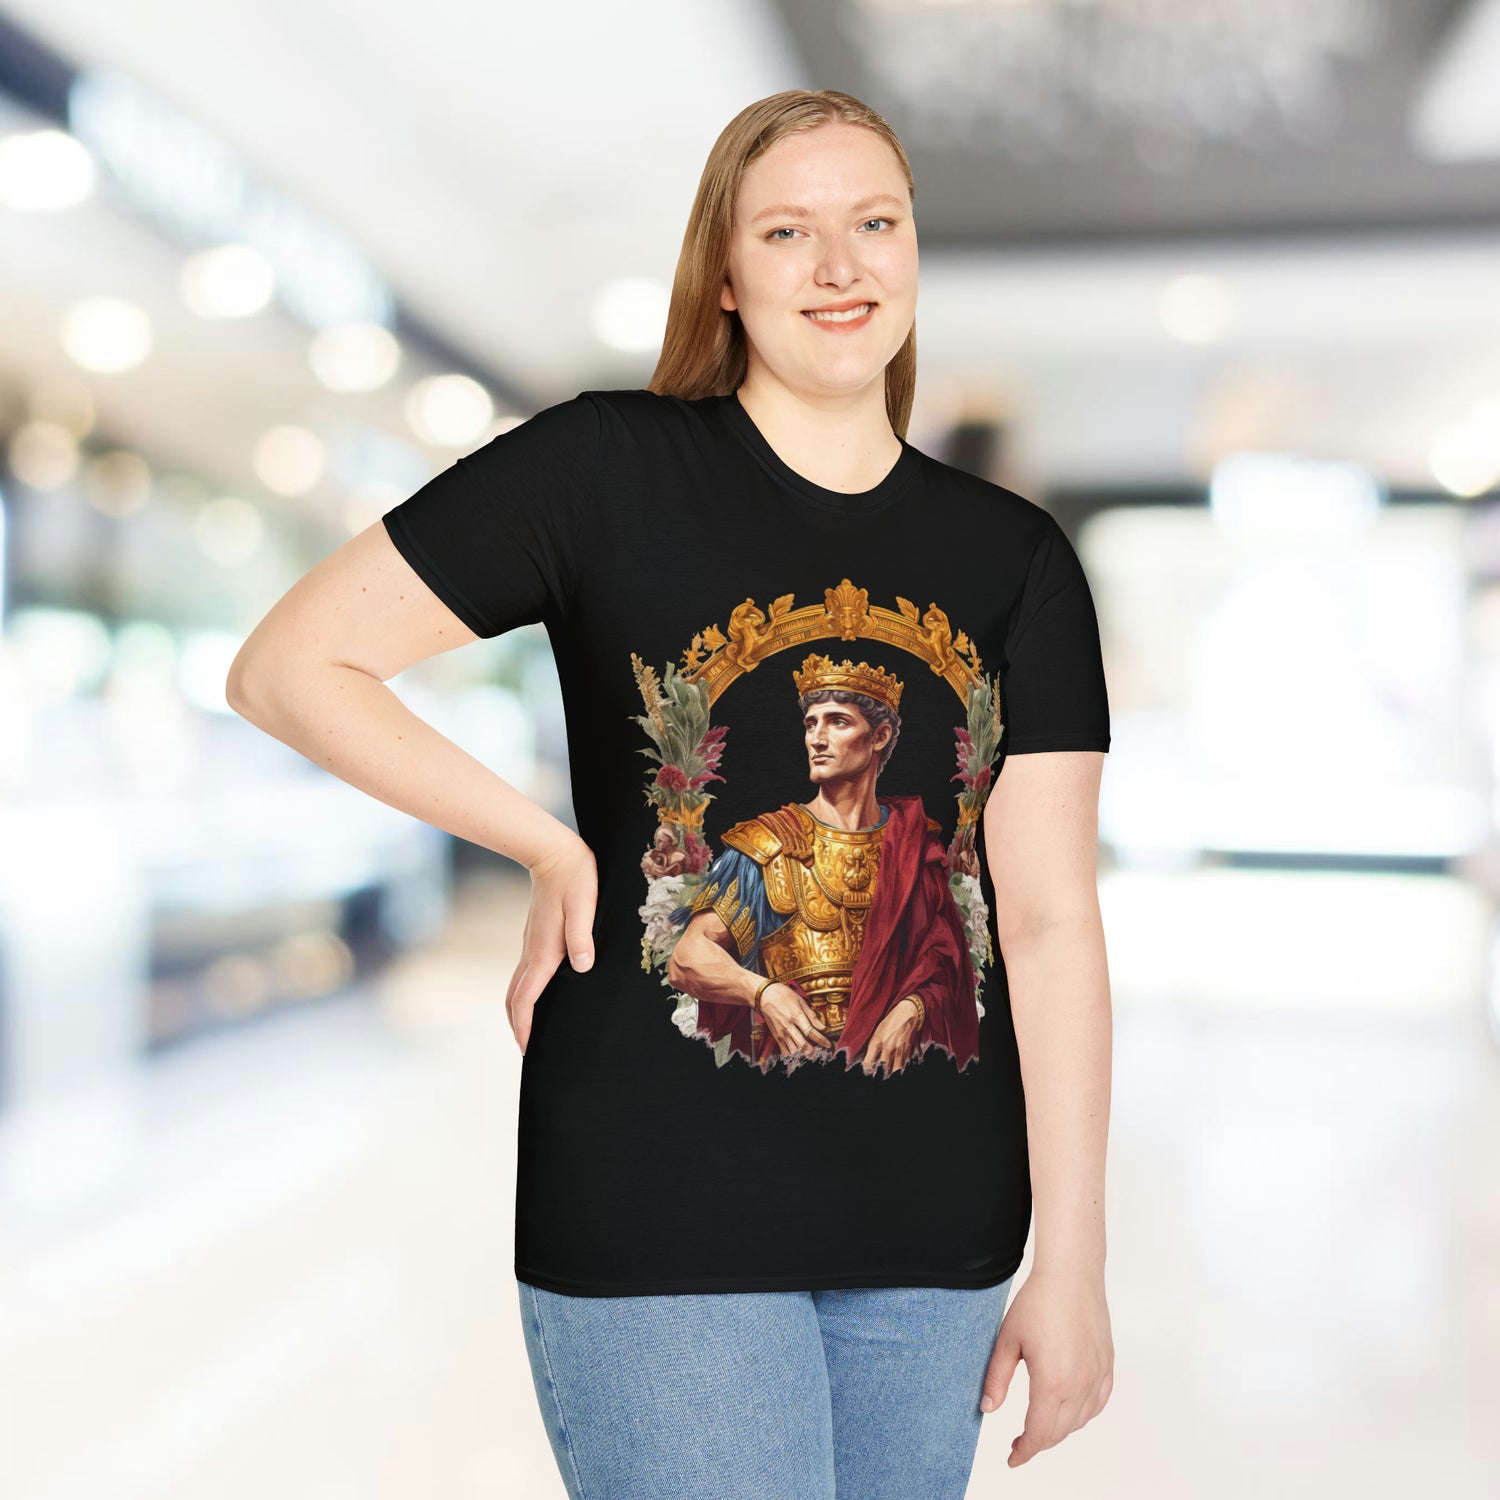 Graphic Tees - Historical Themes